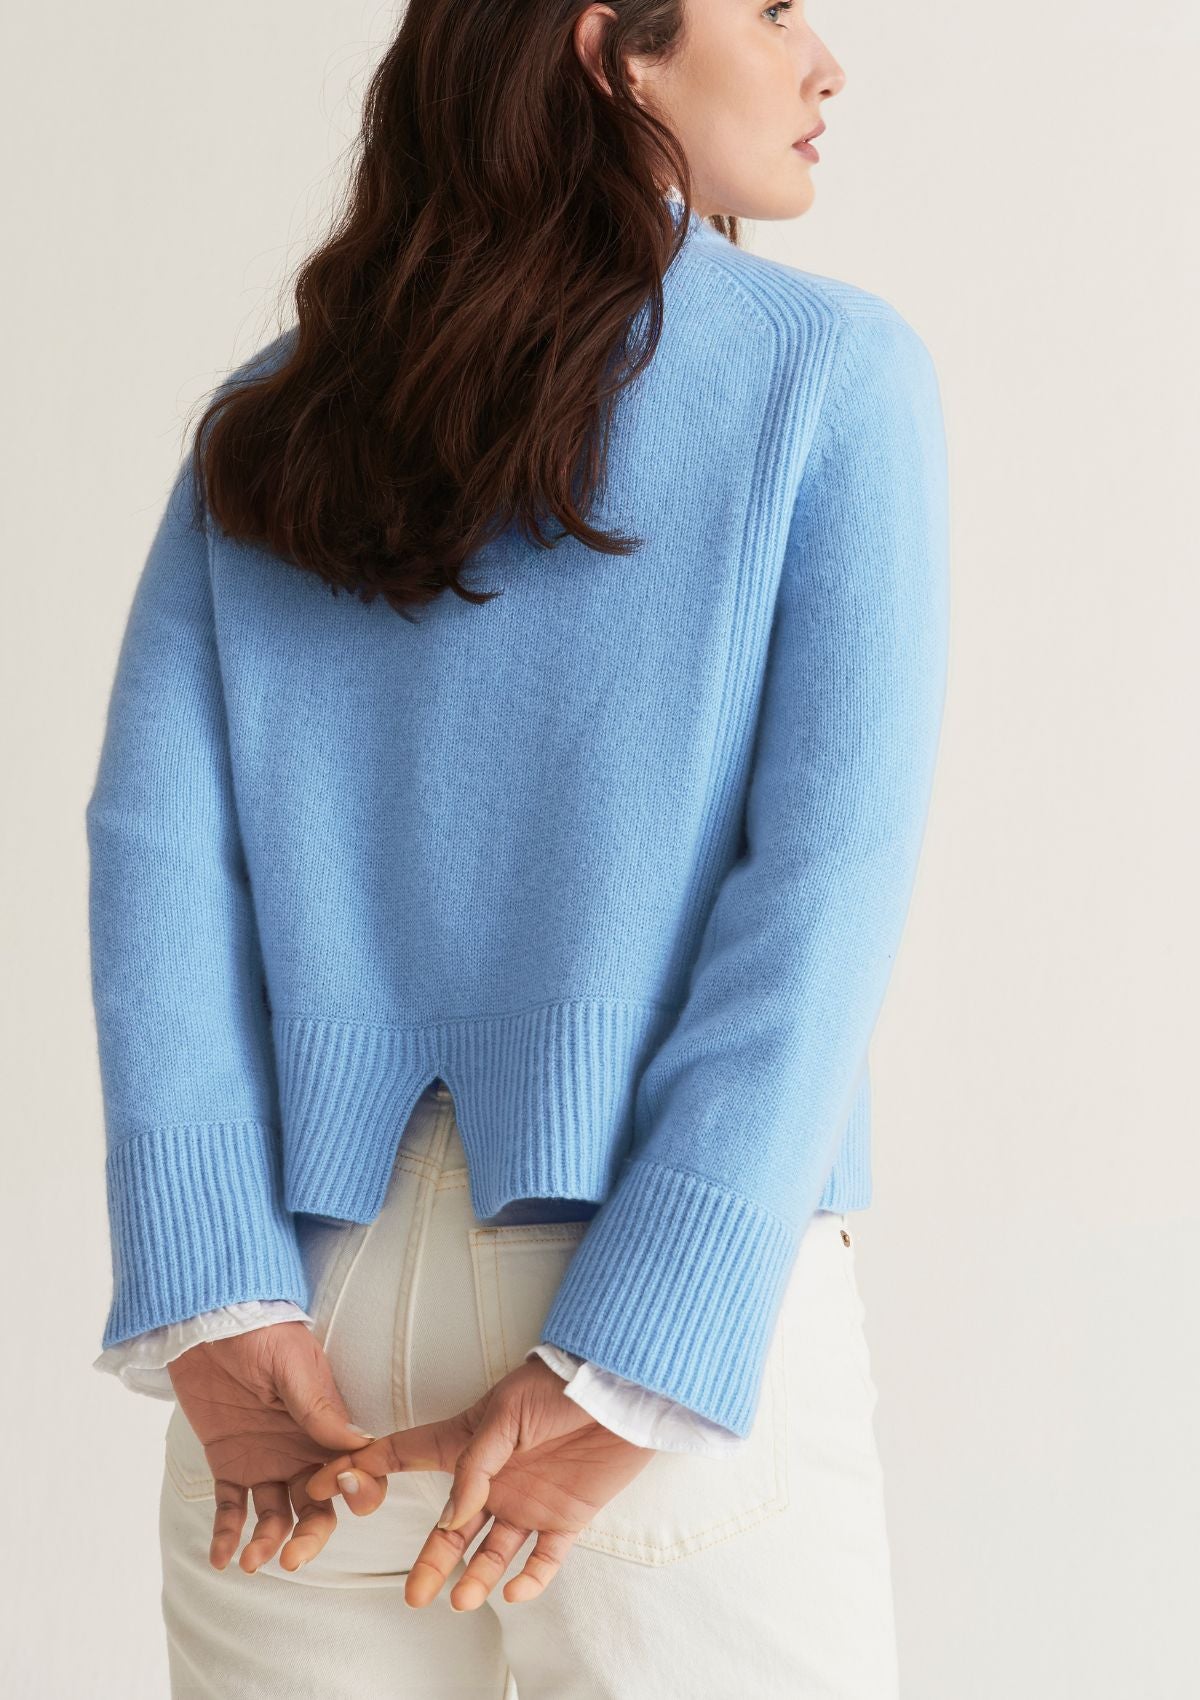 Cropped Cashmere Sweatshirt in Washed Blue